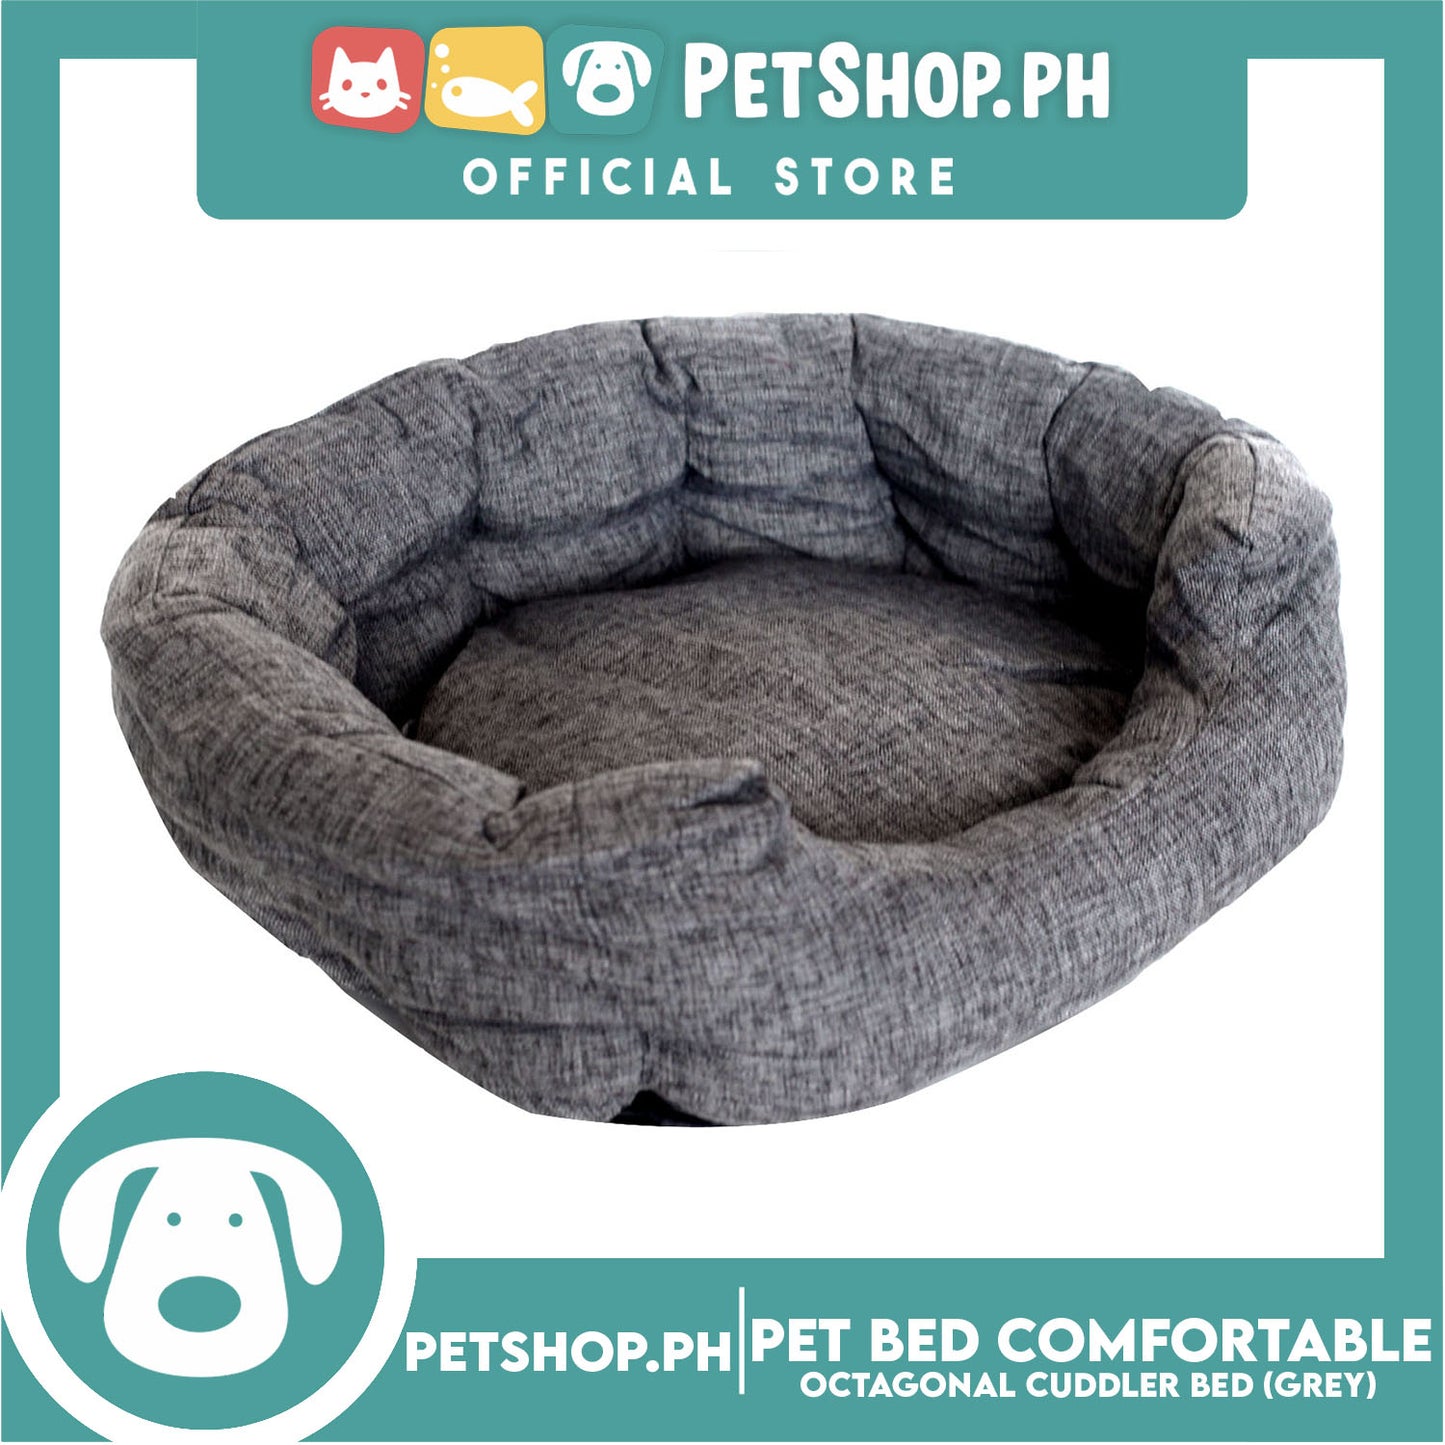 Pet Bed Comfortable Octagonal Cuddler Dog Bed 42x35x13cm Small for Dogs & Cats (Grey)